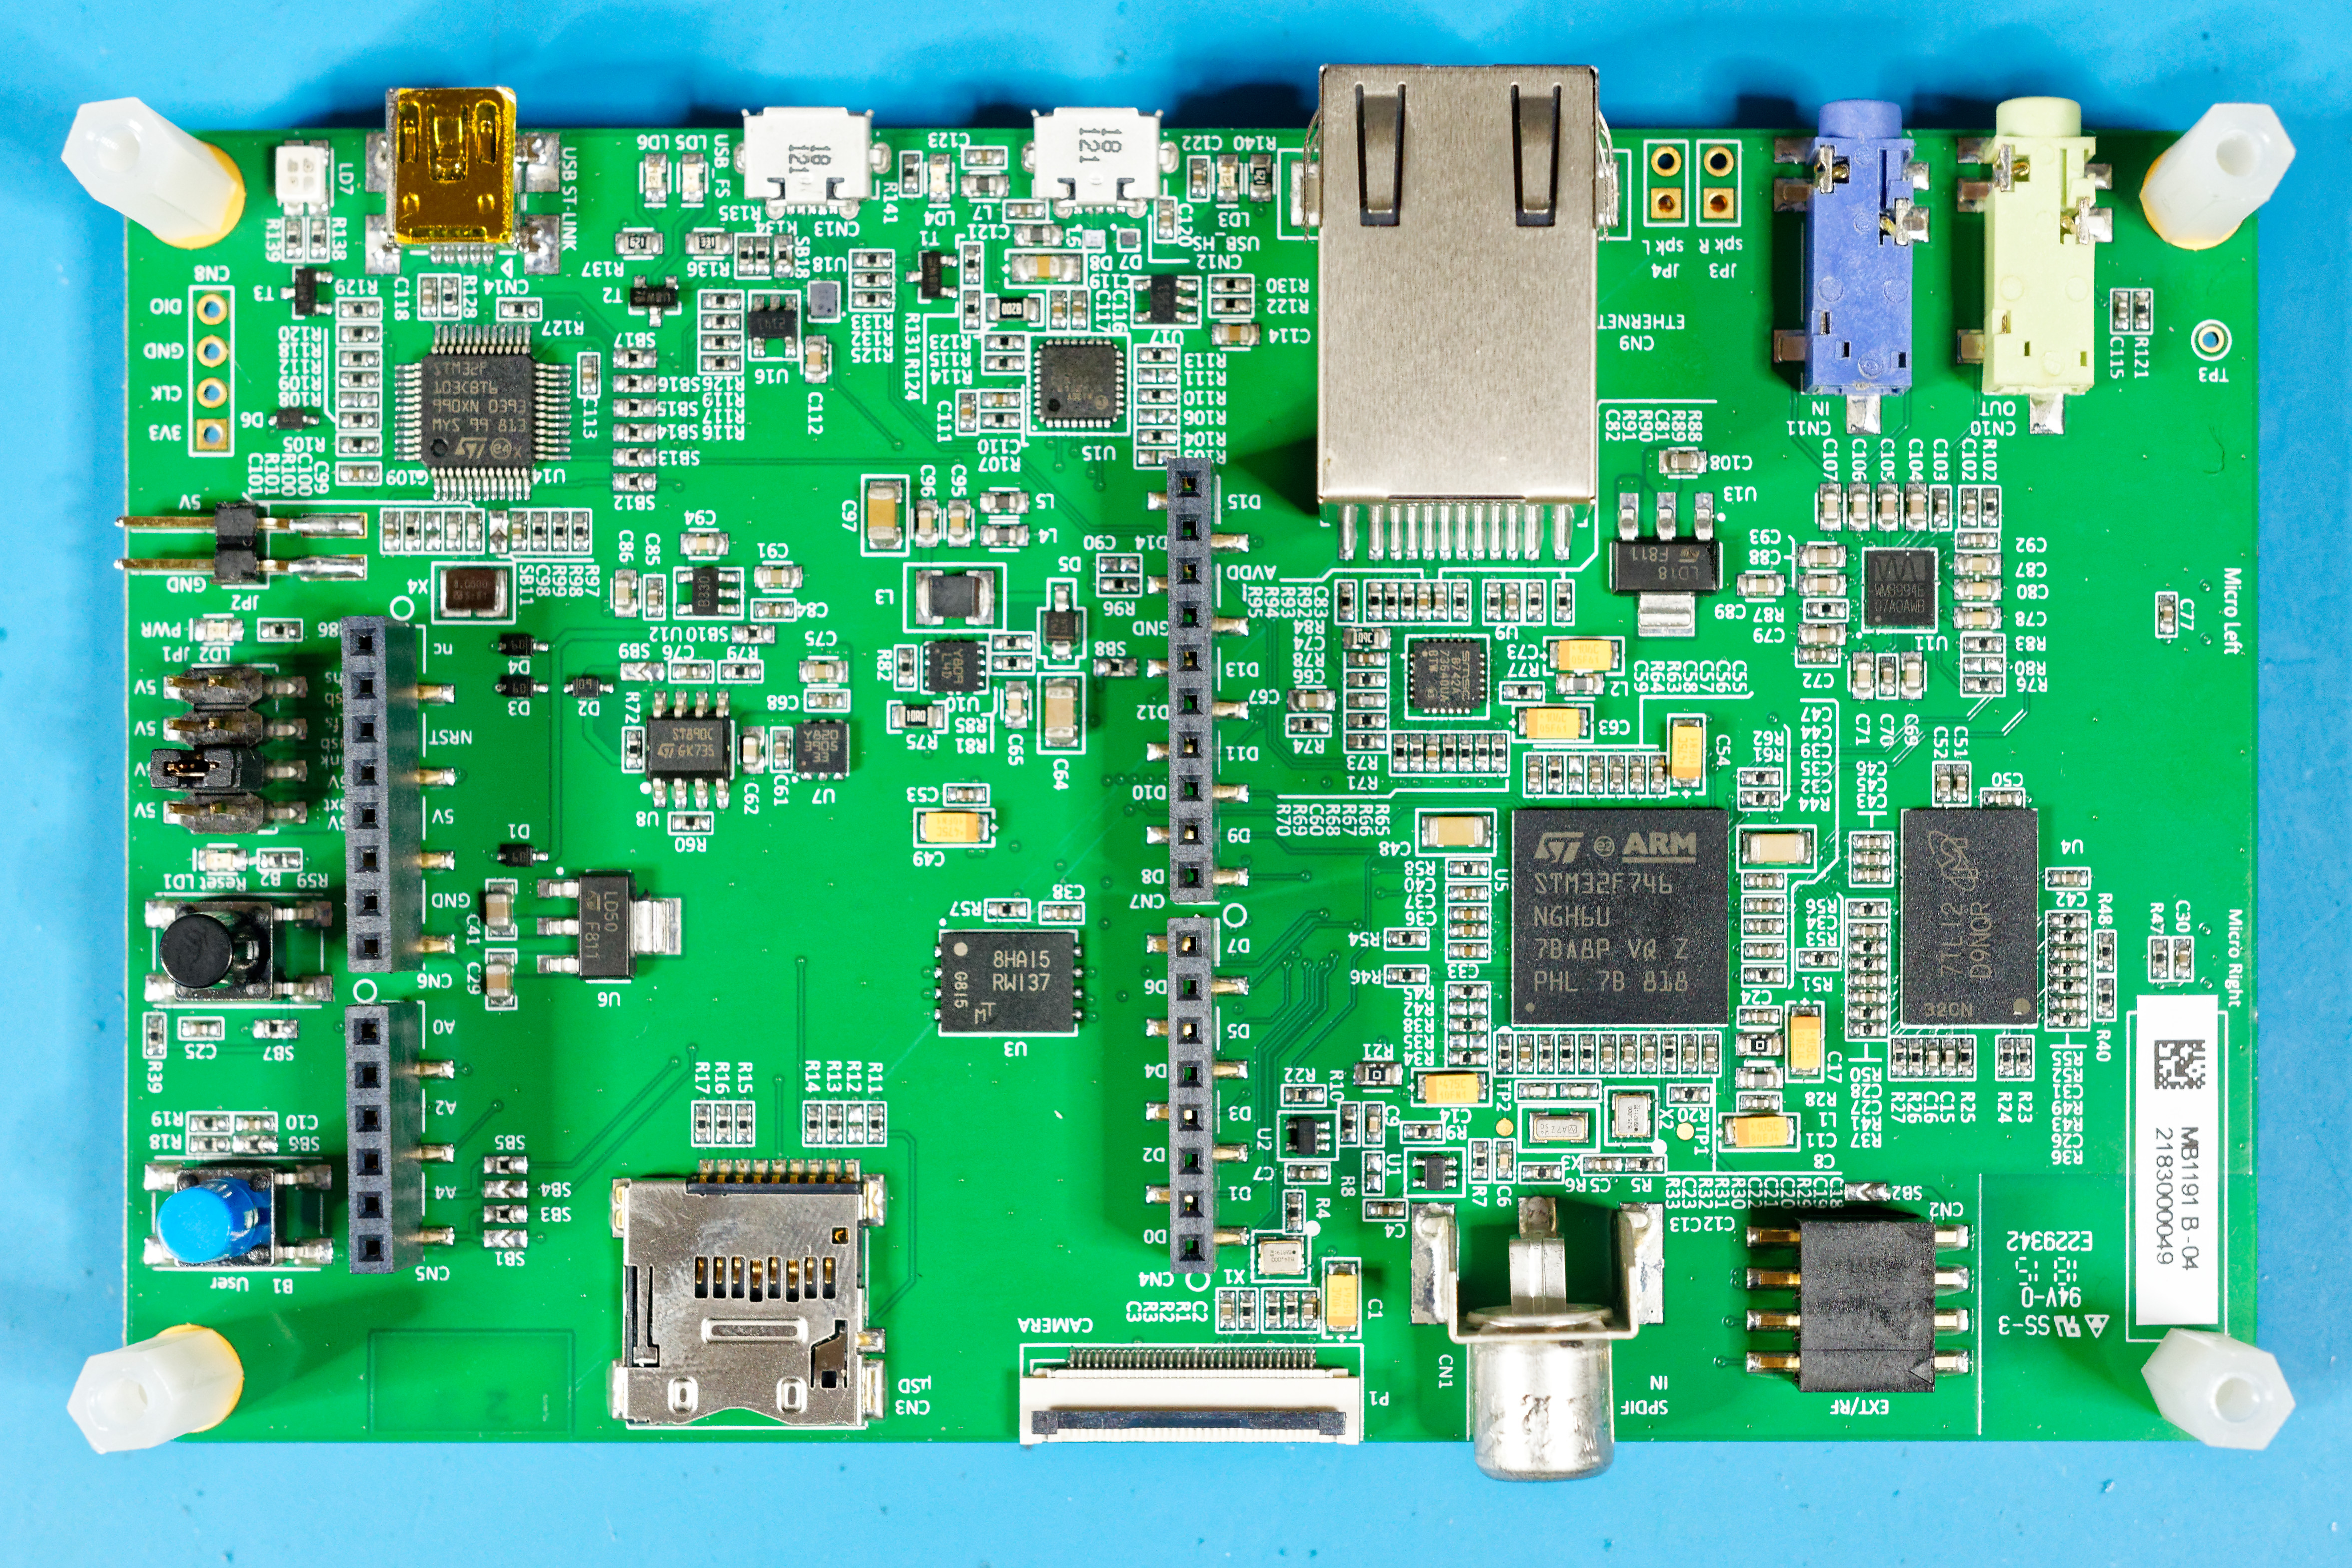 STM32F746 Discovery board for vapor phase reflow soldering